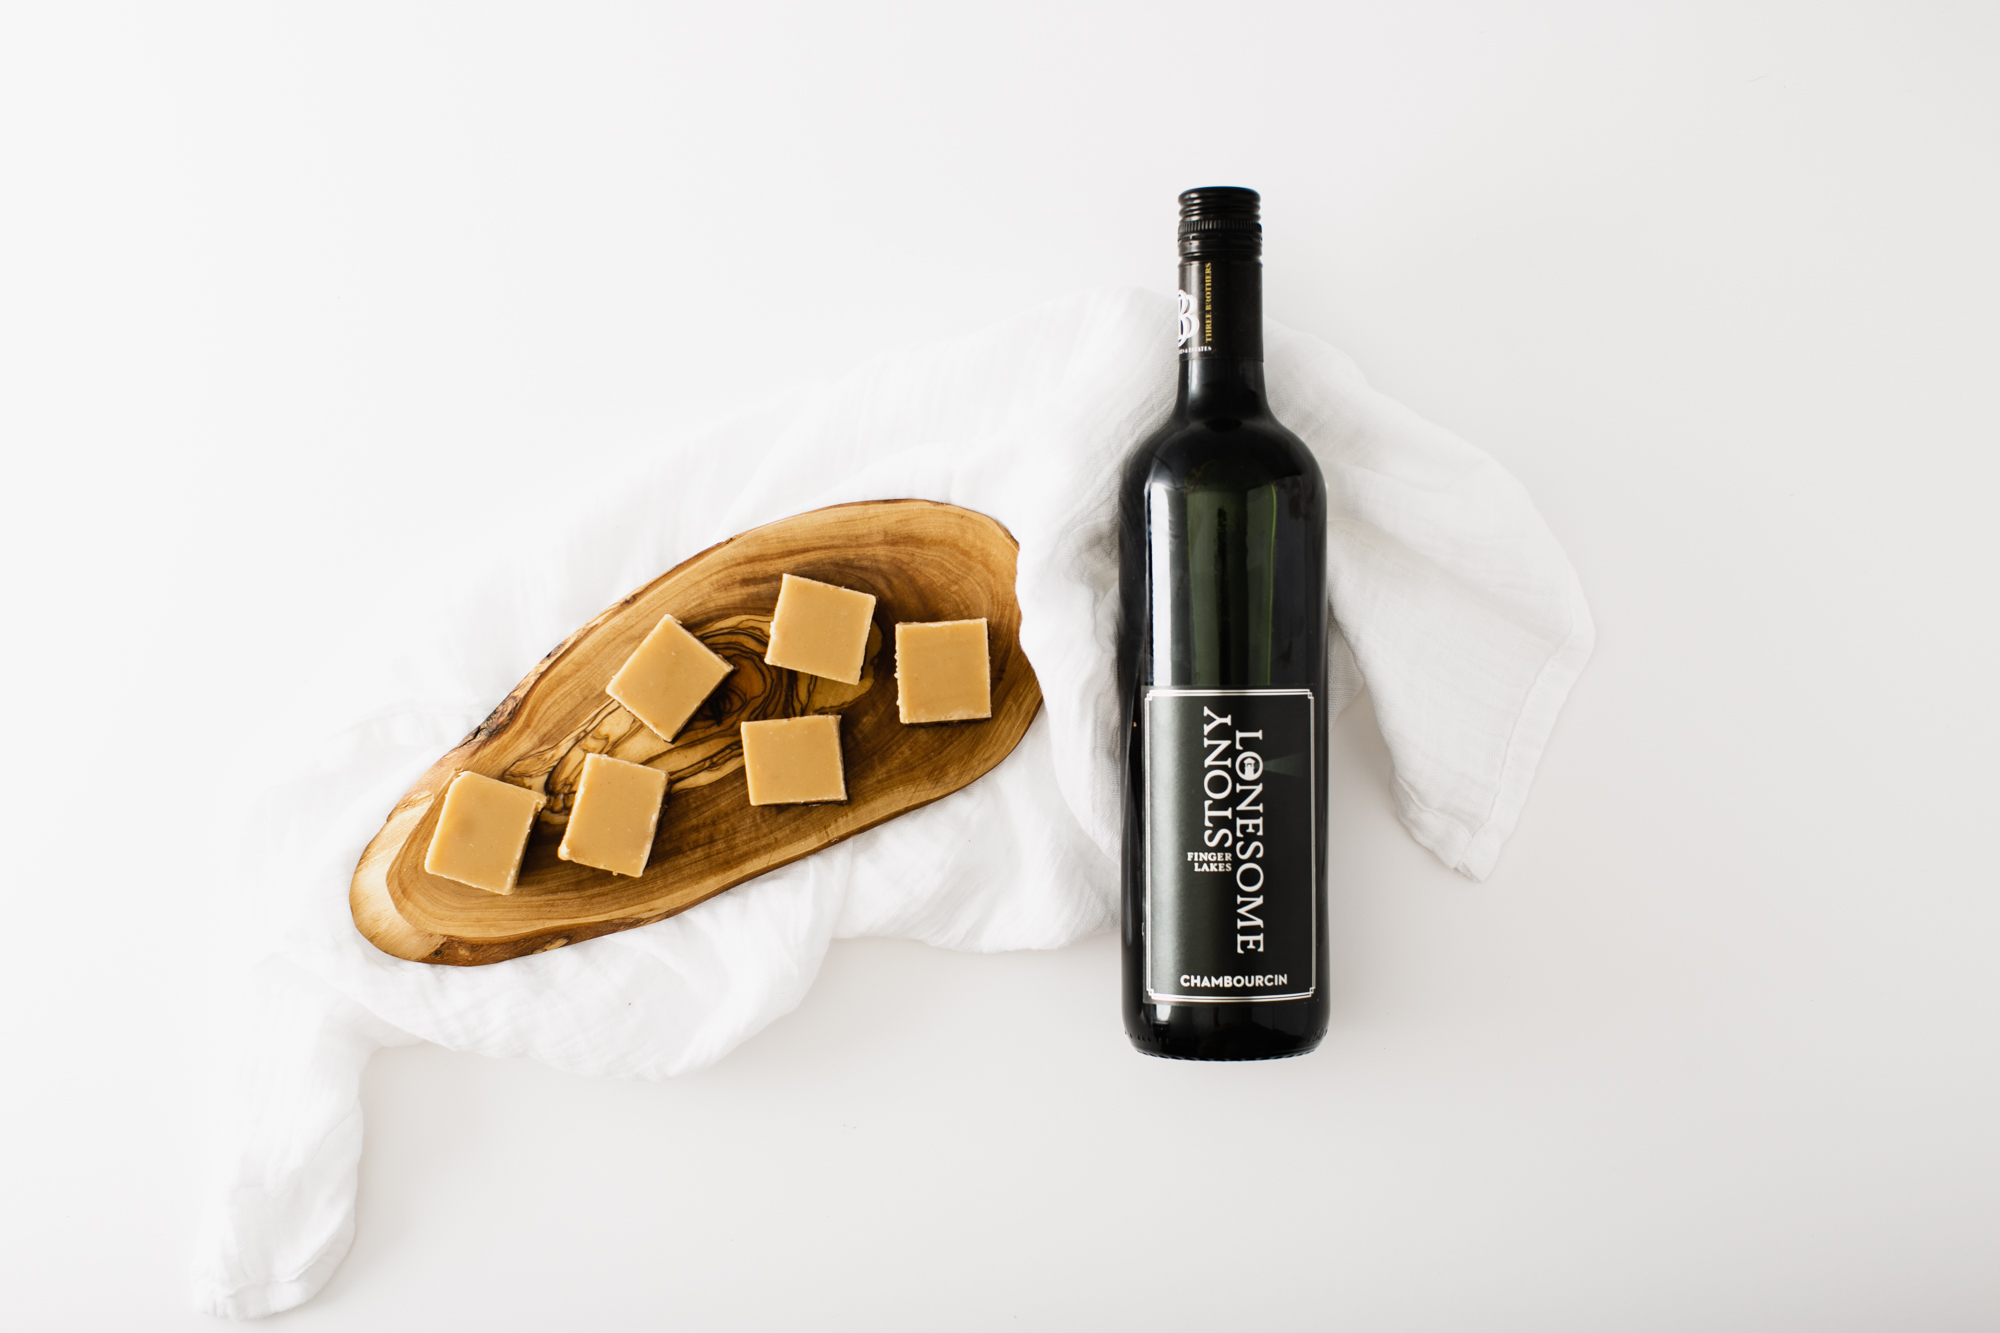 chambourcin wine and peanut butter fudge with white towel